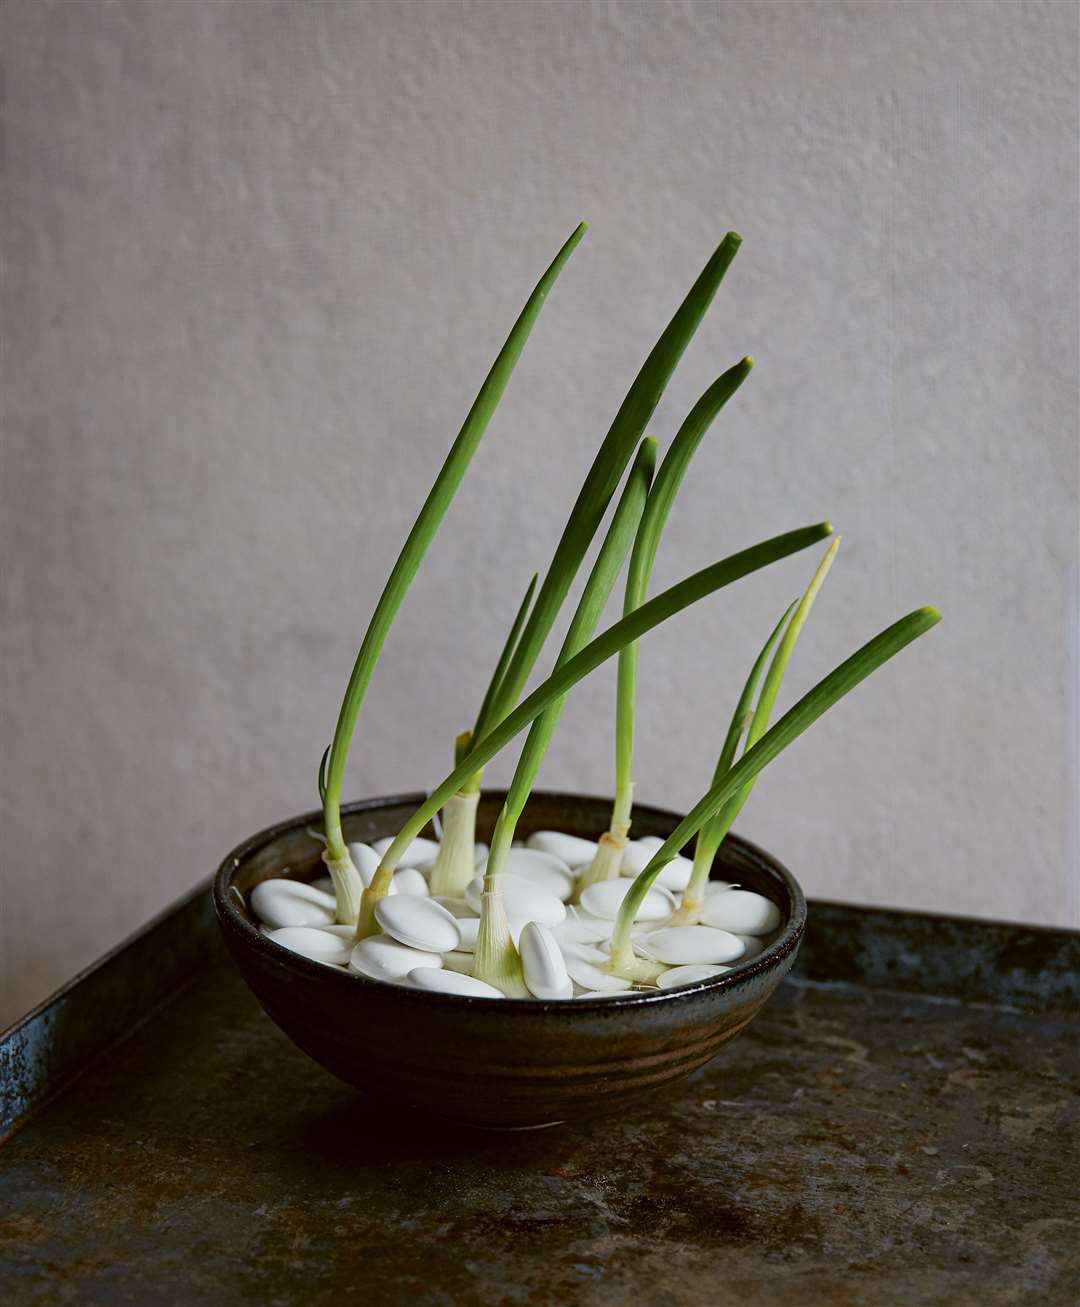 Spring onions growing in a bed of pebbles in water. Picture: Kim Lightbody/PA